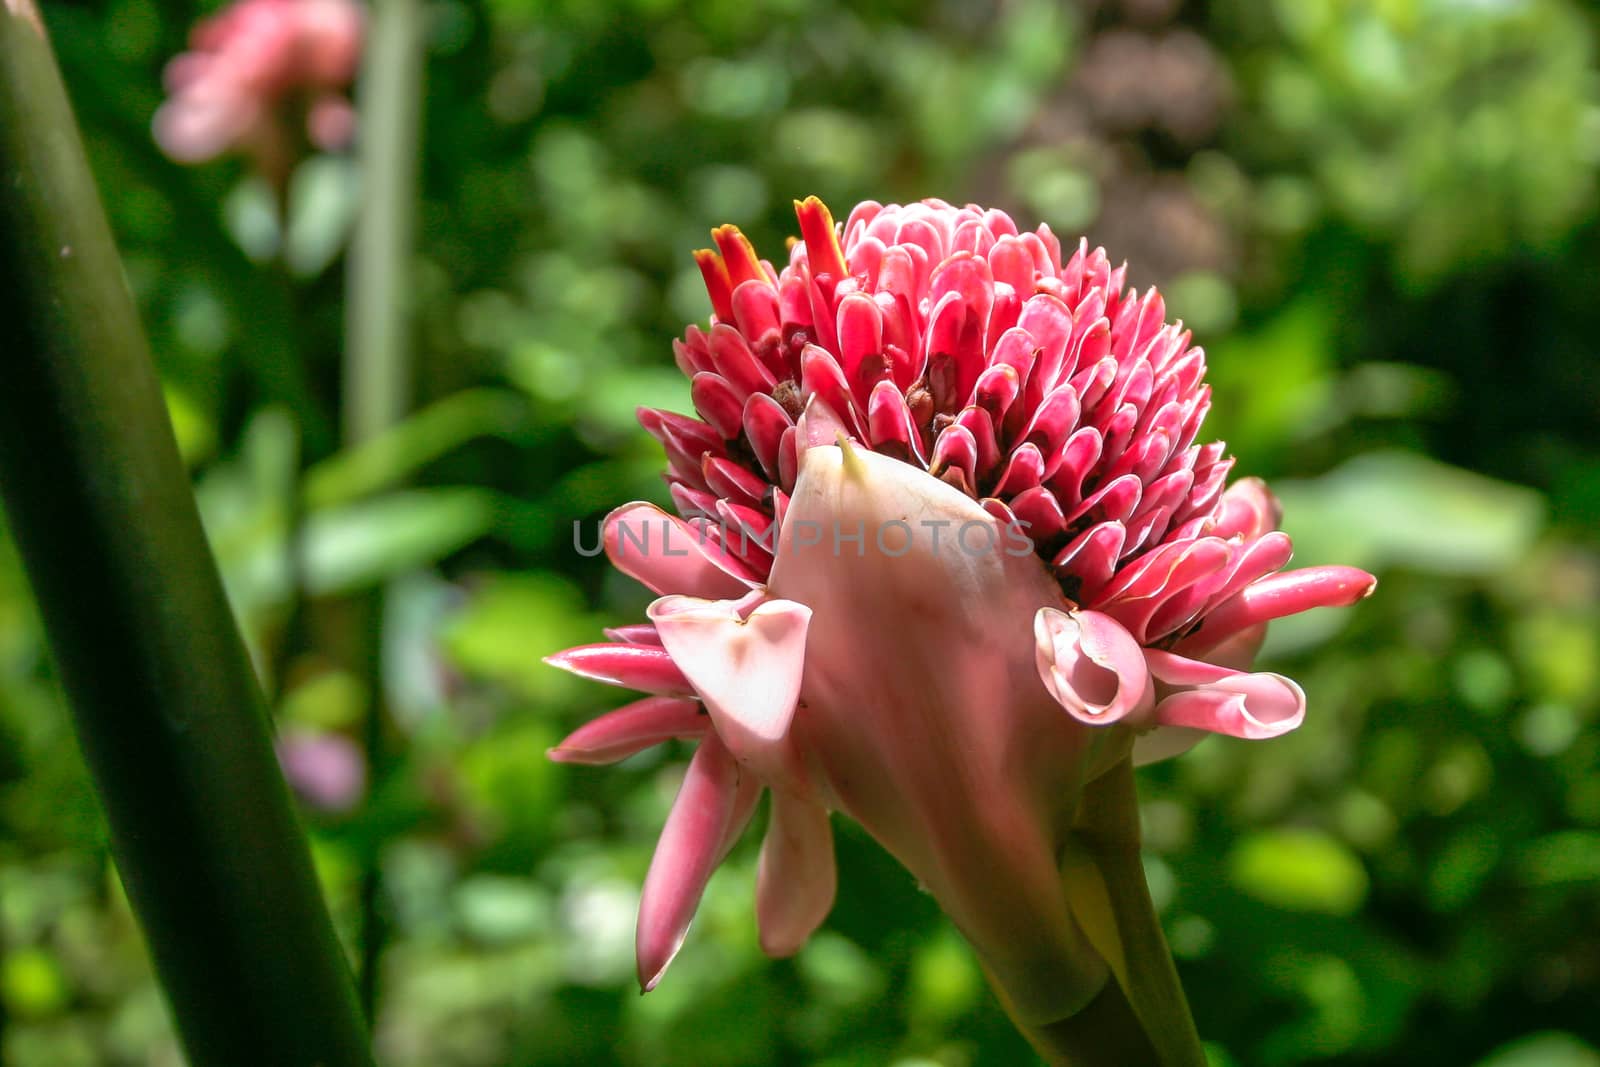 Torch Ginger by magicbones